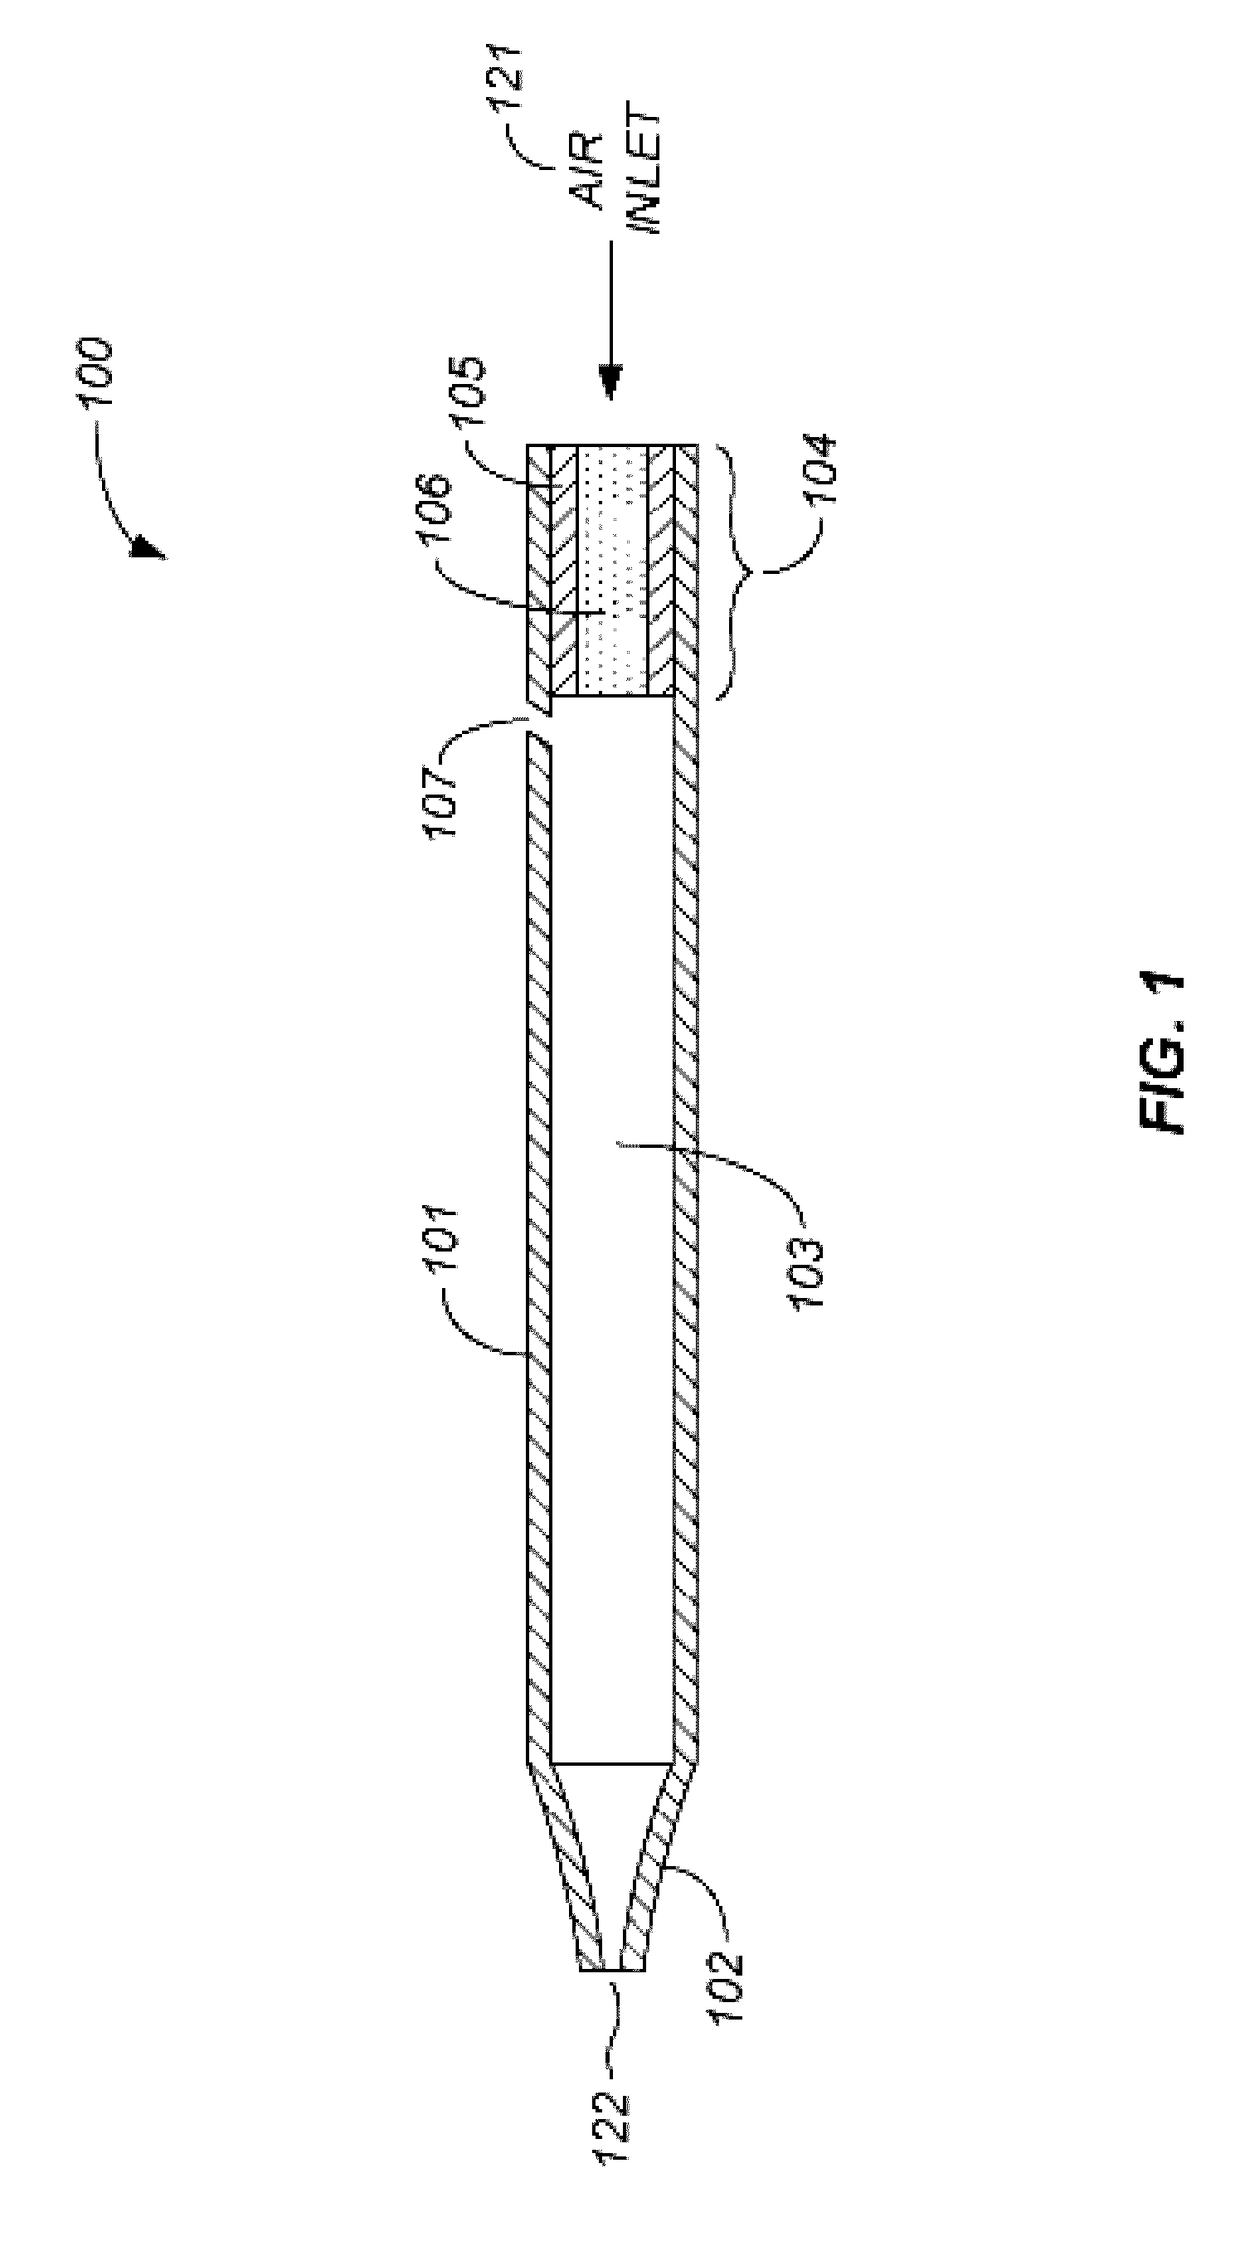 Vaporization device systems and methods